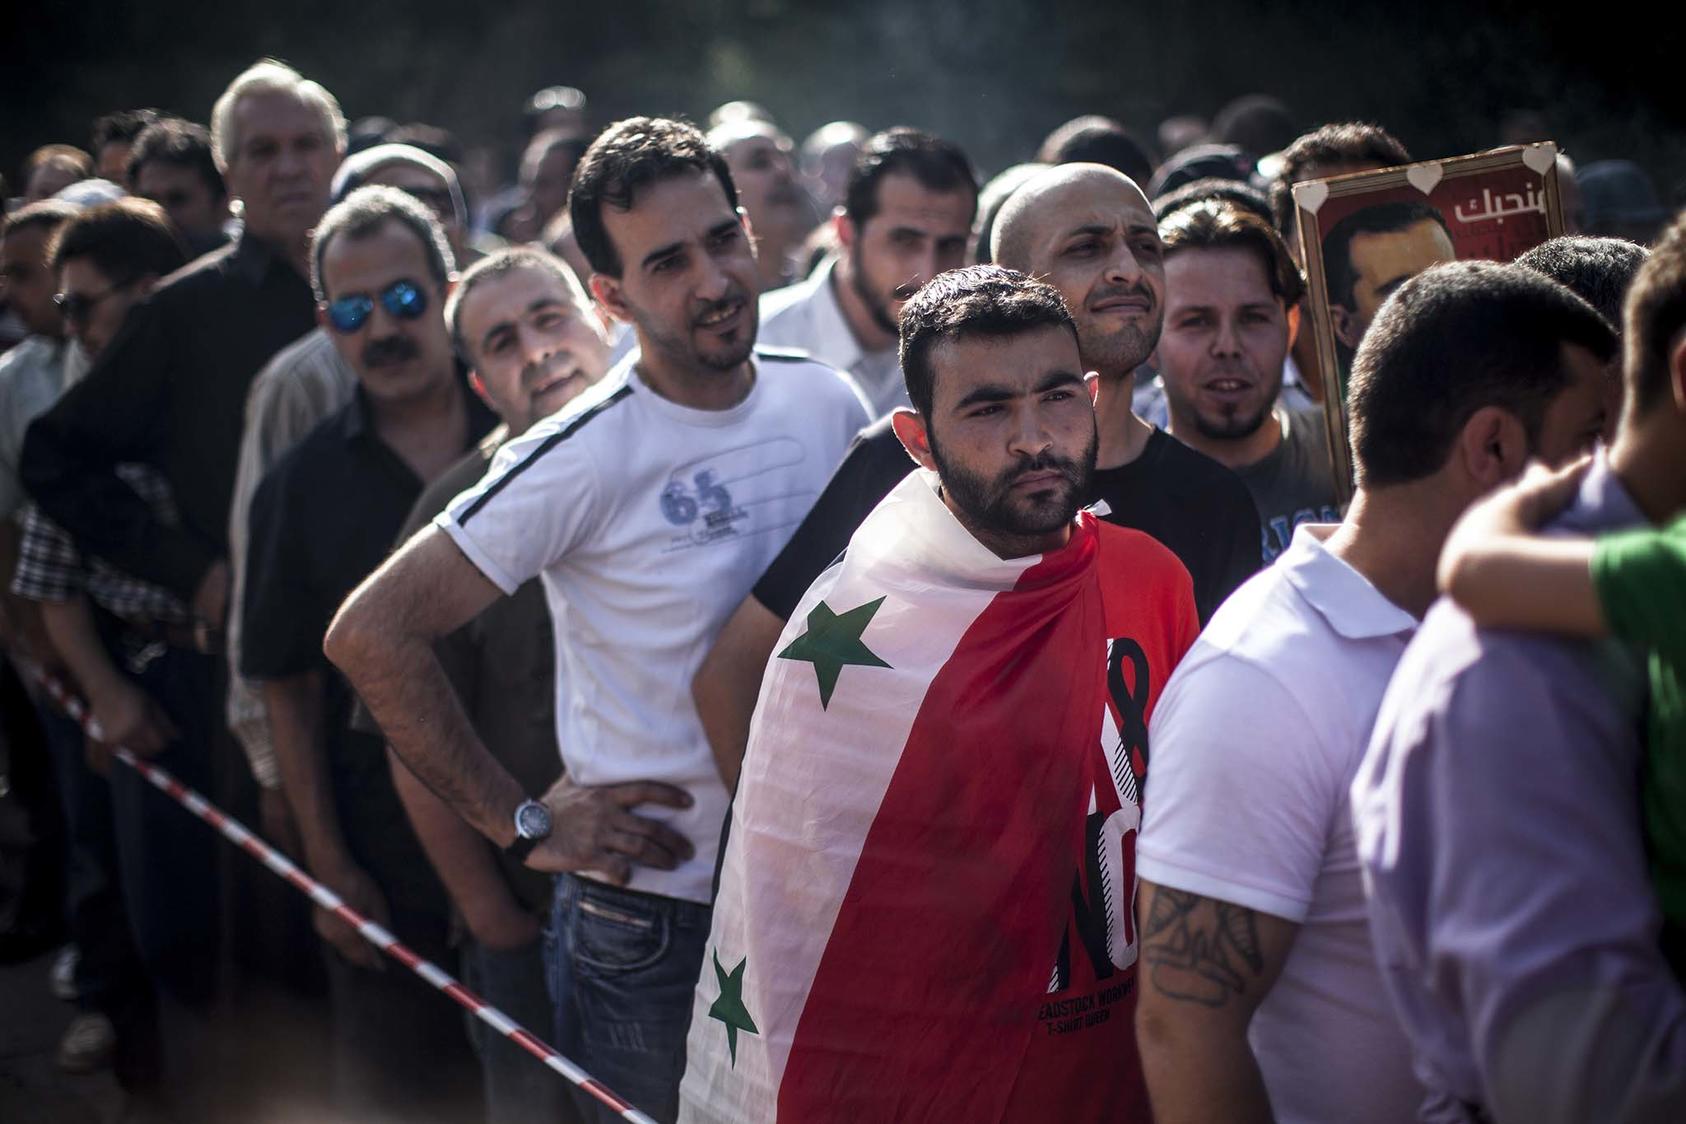 Syrian expatriates wait in long lines to register and vote at their embassy just outside Beirut, in Baabda, Lebanon, May 28, 2014. (Bryan Denton/The New York Times)